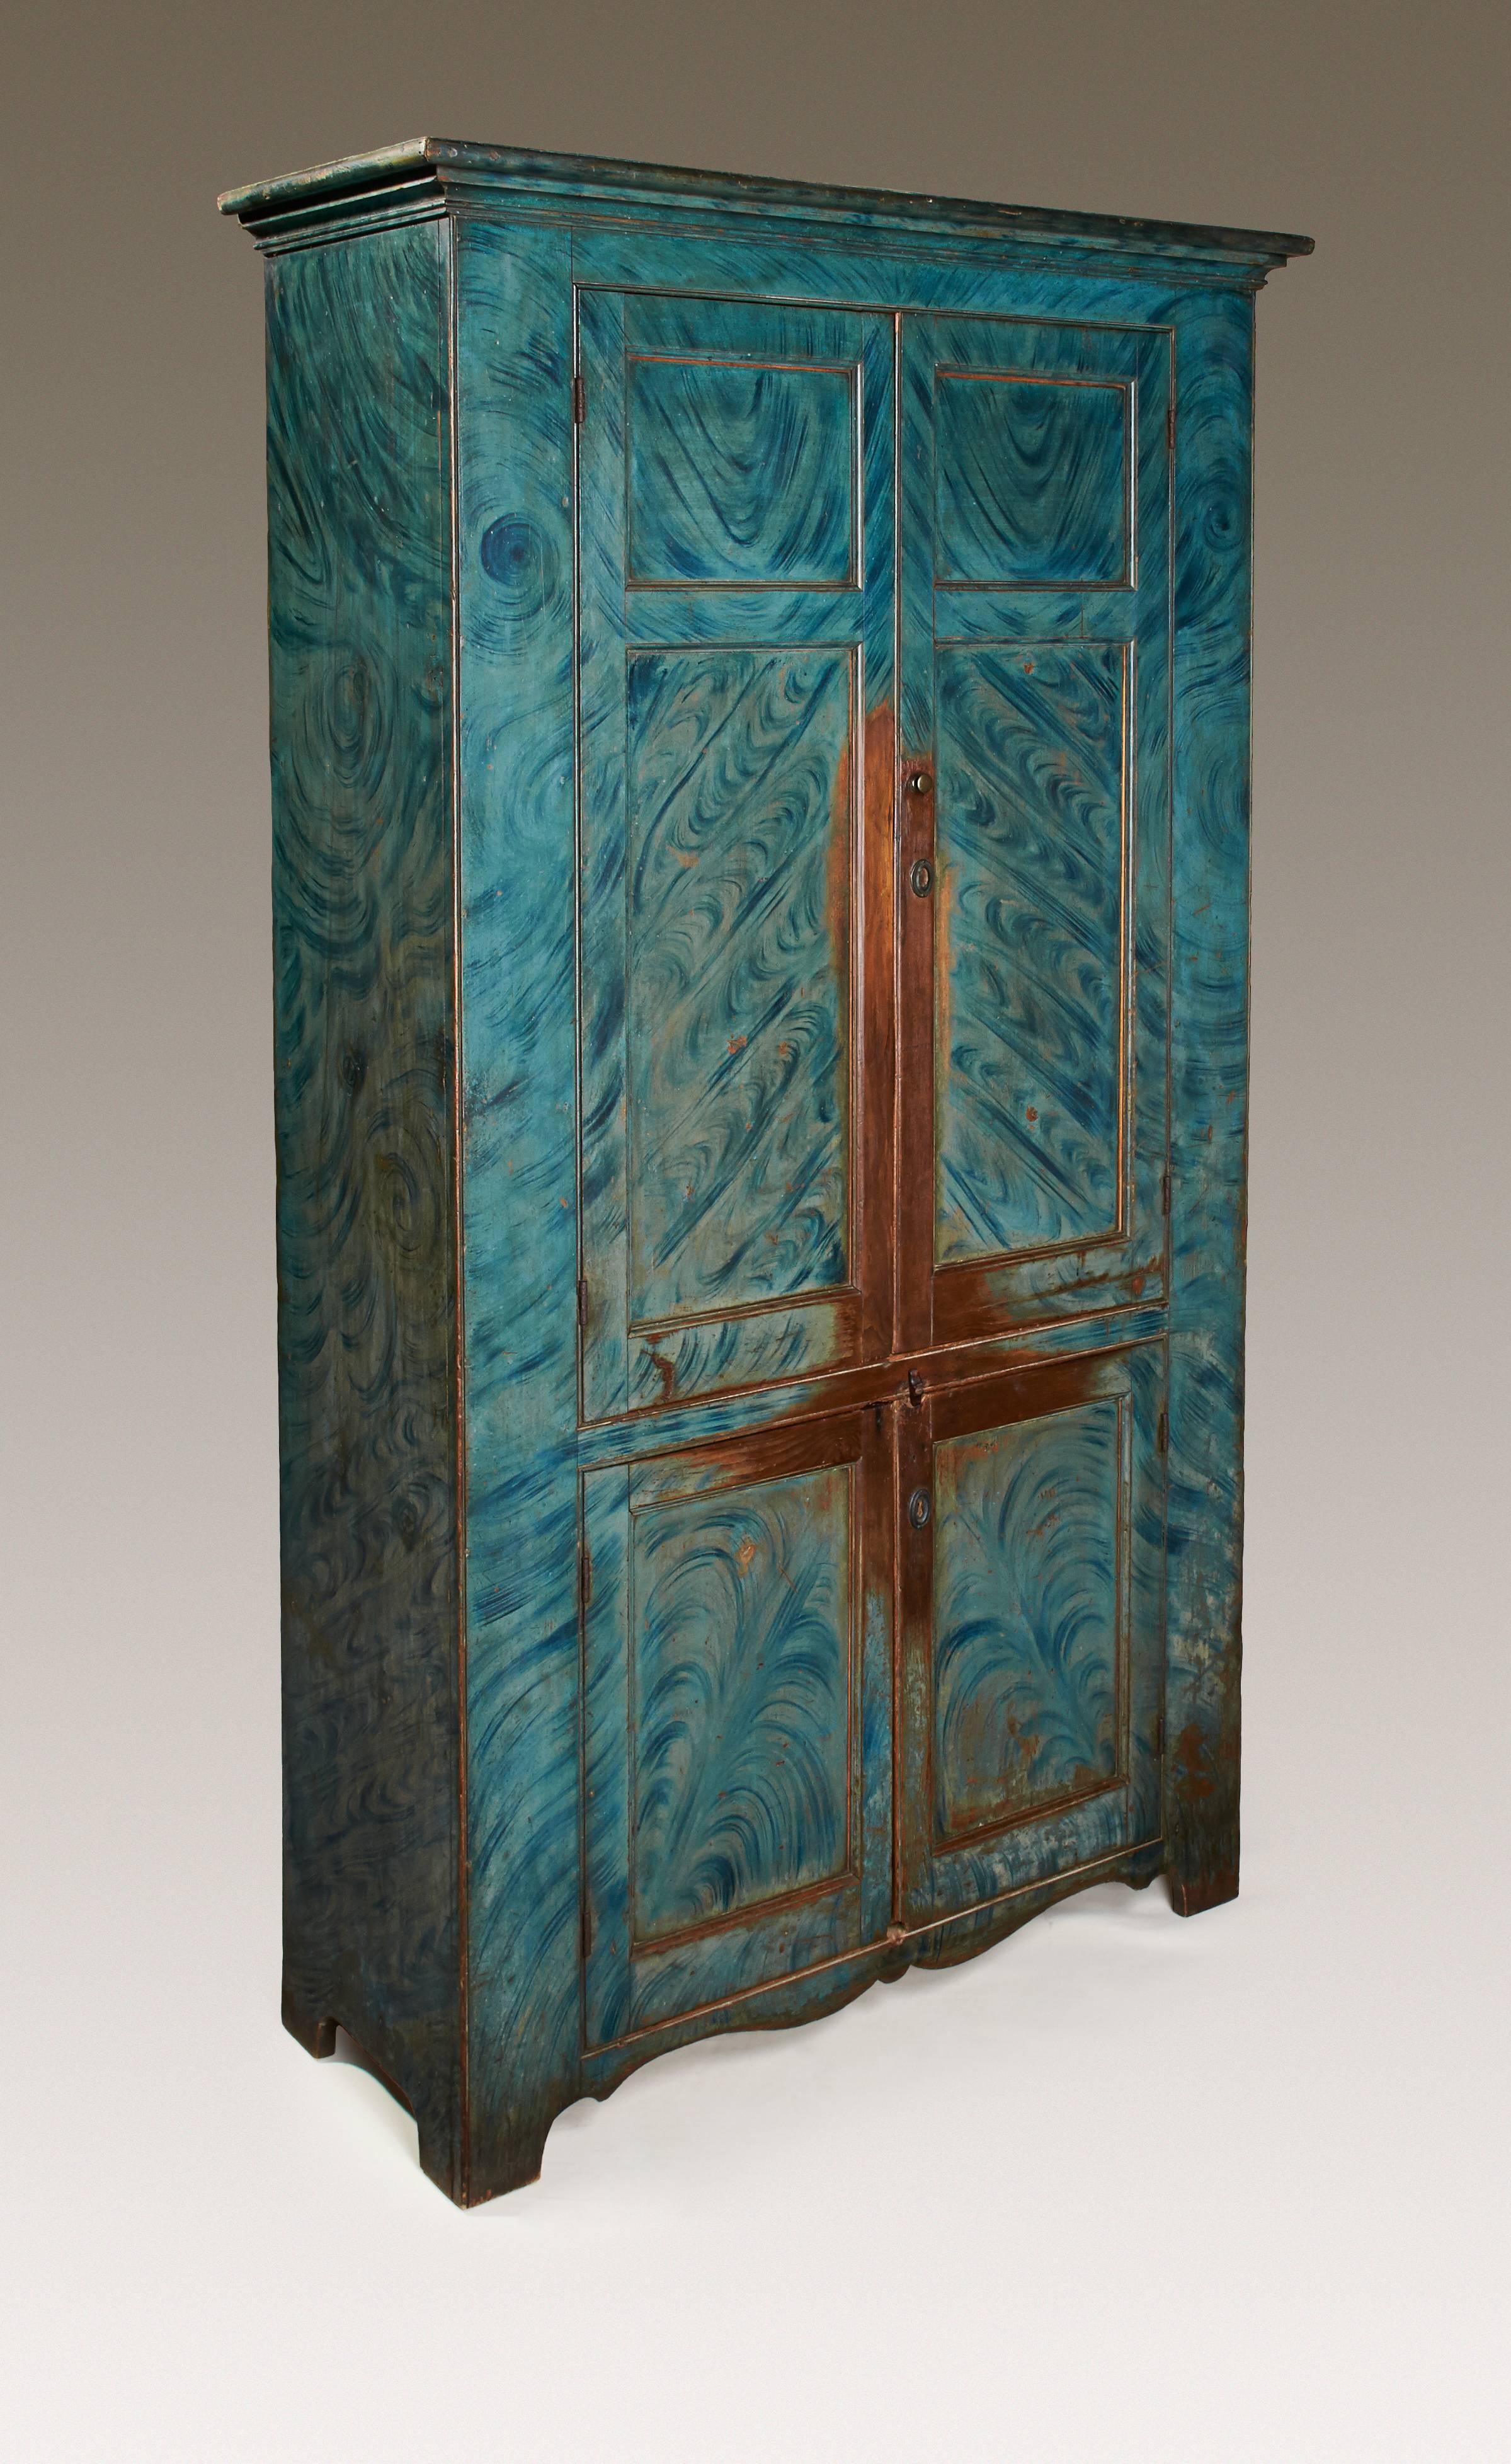 A four-door cupboard with original red-painted interior, shelves with carved plate grooves and the original, striking blue paint-decorated finish. A rare example from Hunterdon County, New Jersey in the Delaware Valley and an exceptional piece of